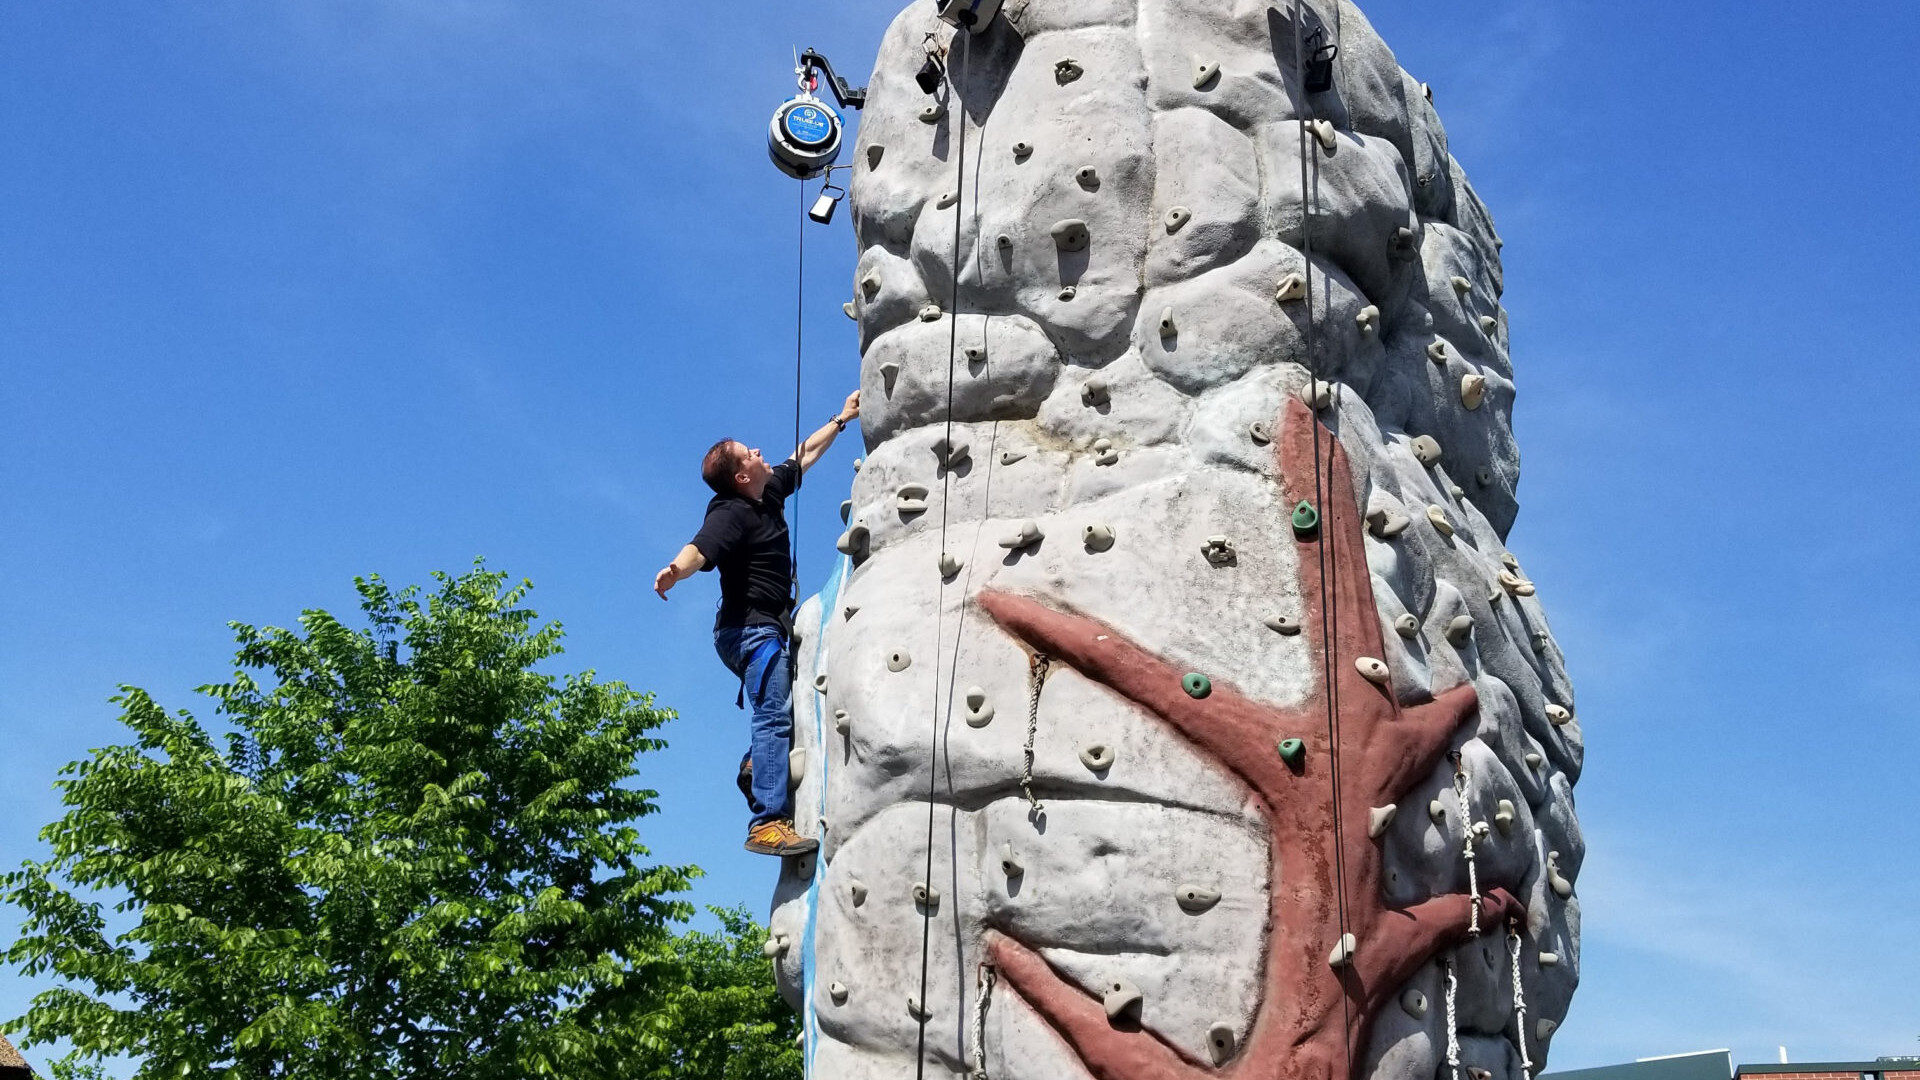 A man almost at the top of a mobile rock-climbing wall rental.